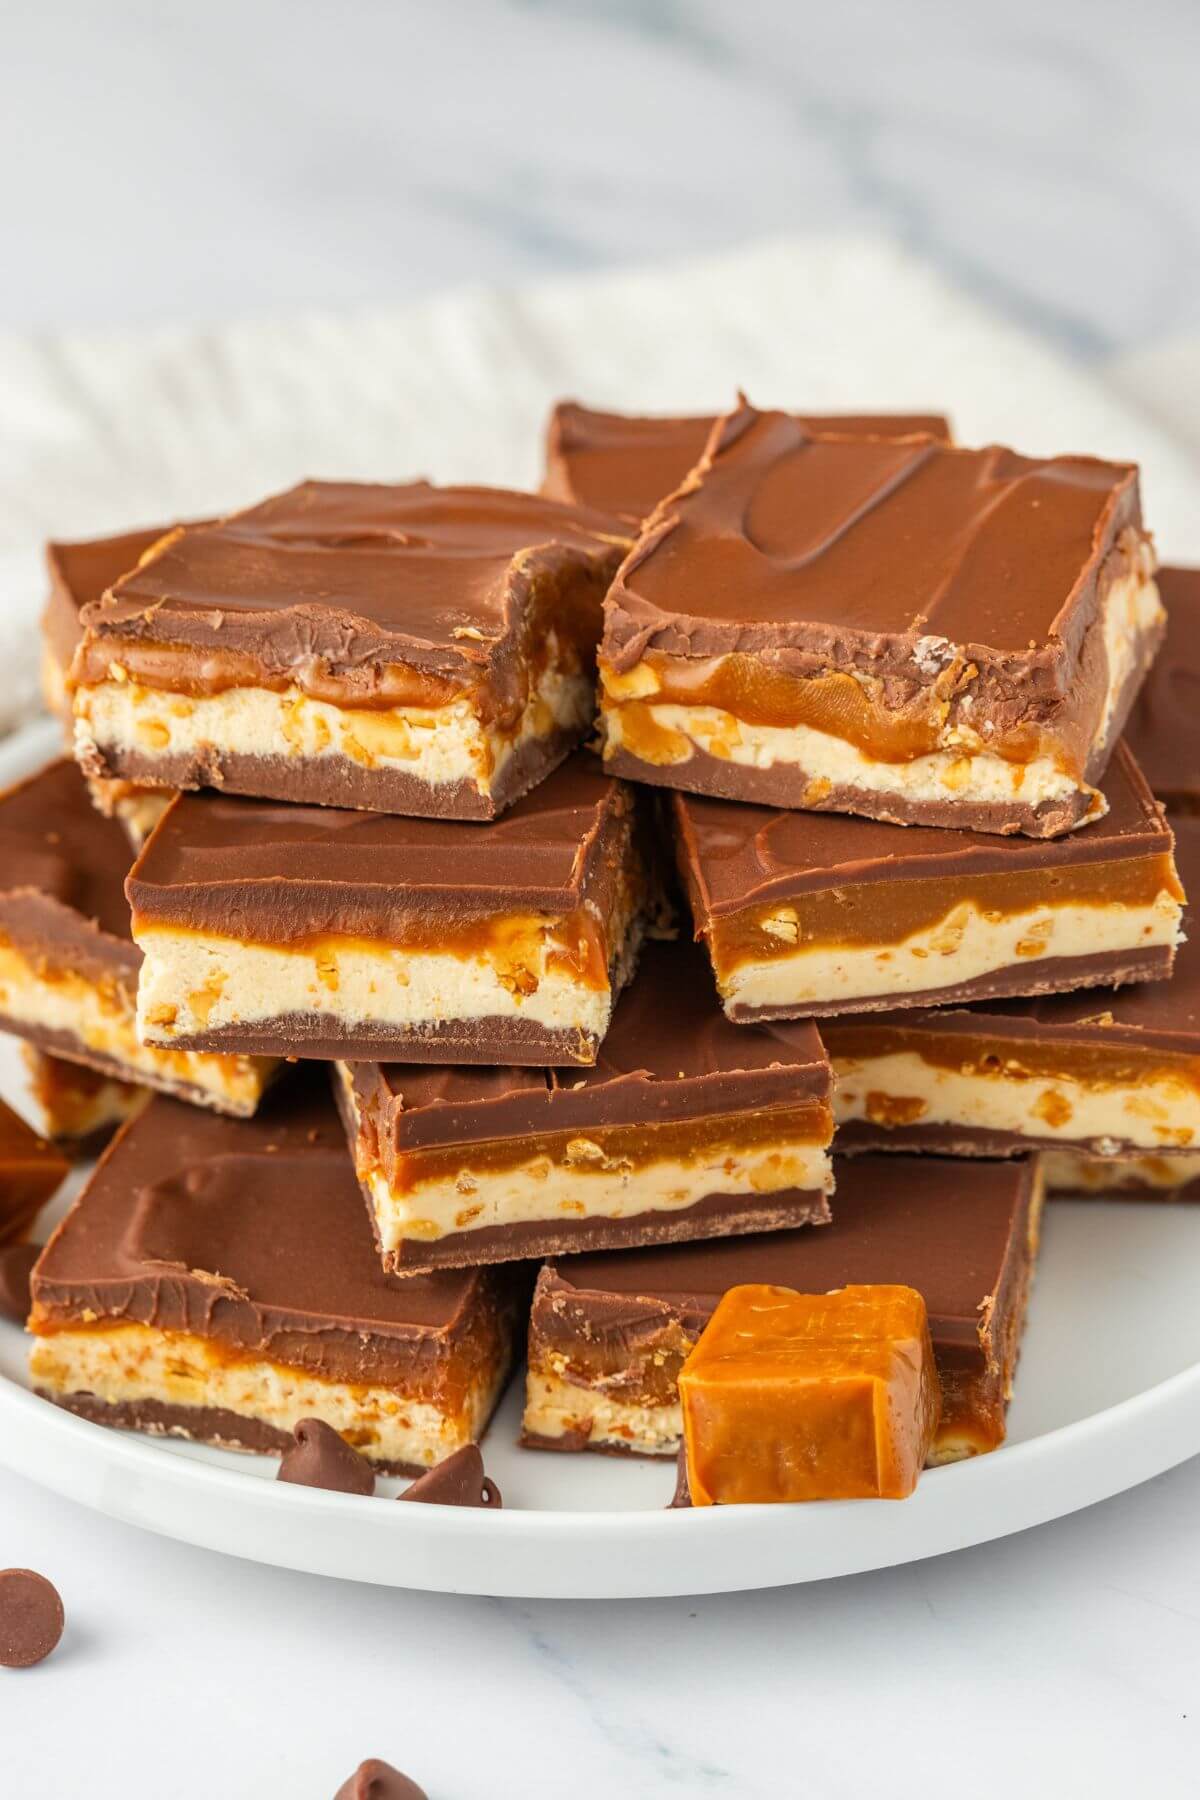 A plate is stacked full of fudge.